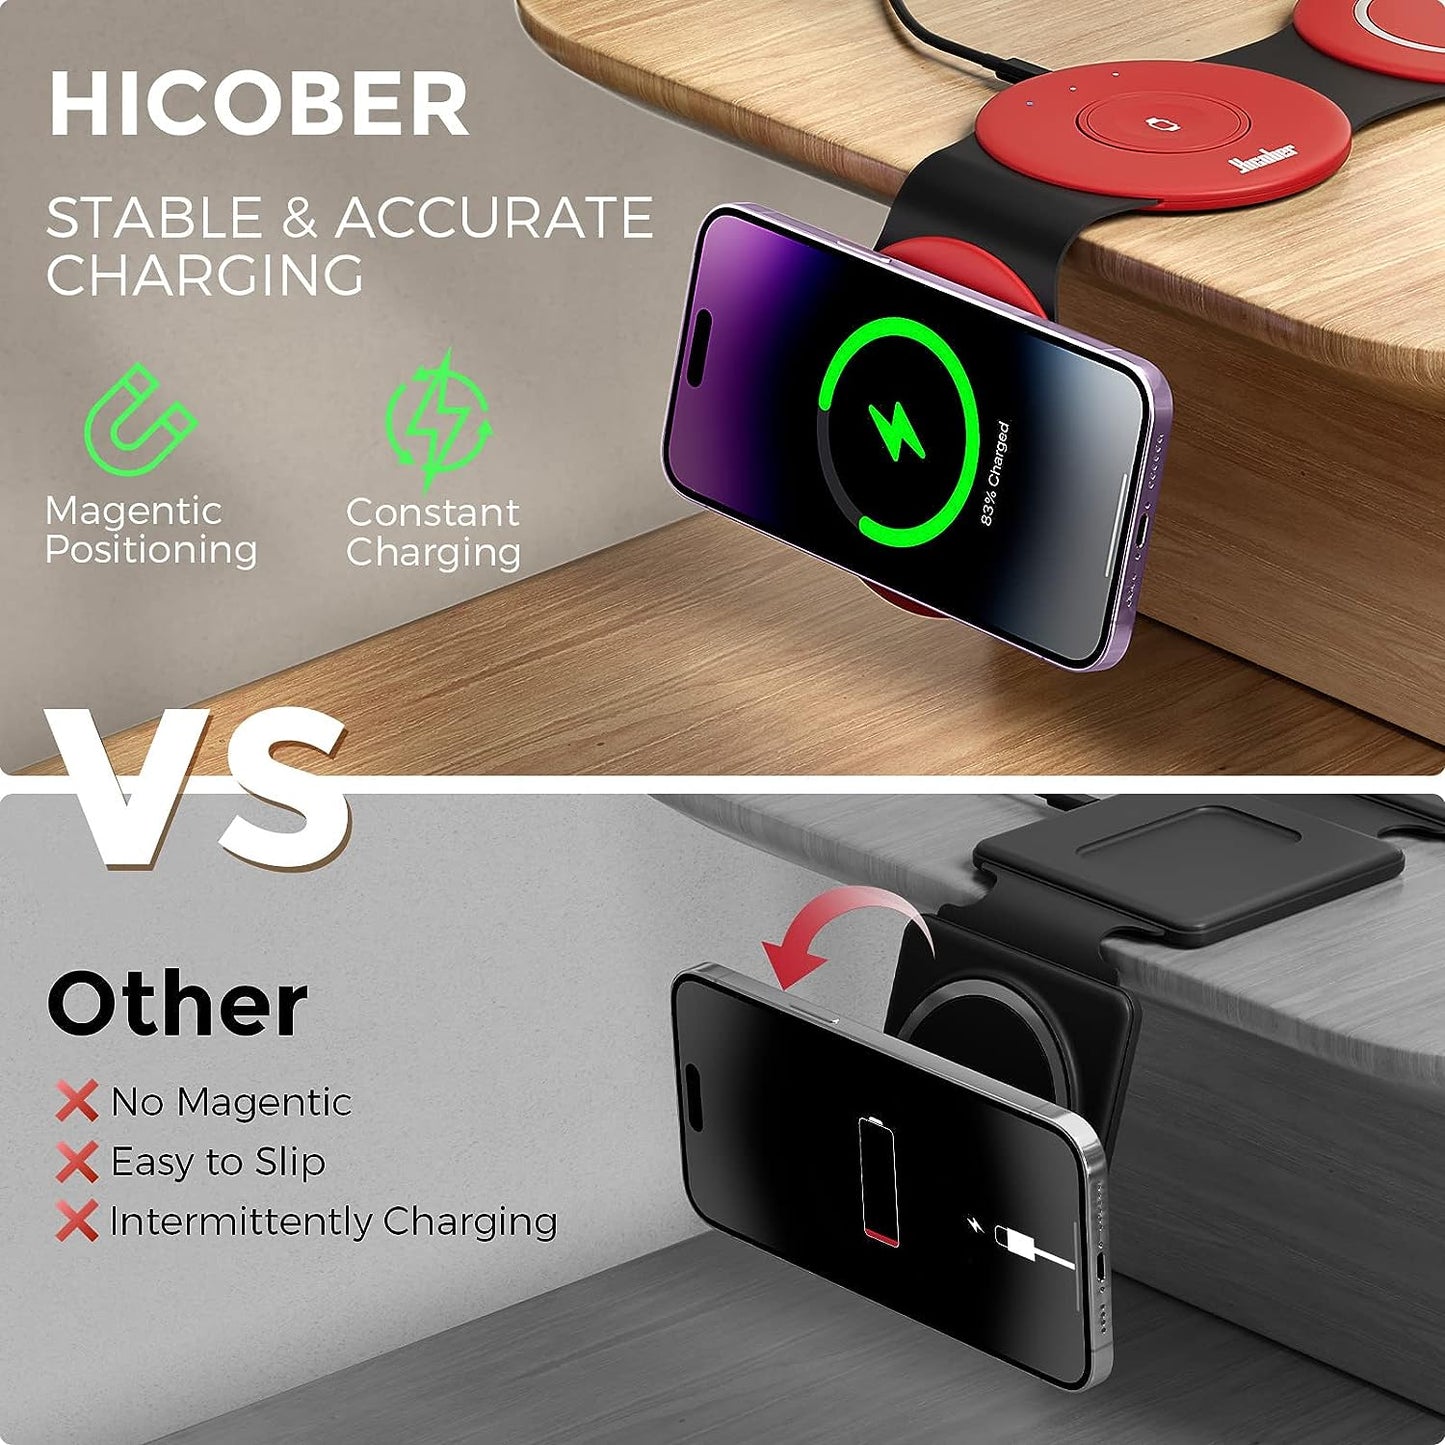 THE BEST 3 in 1 Charging Station for Apple Watch Charger, Hicober Magnetic Wireless Charger Foldable Travel Stand for iPhone 14/13 / 12 / Series iWatch 8 7 6 5 4 3 2 SE Airpods 3 2 Pro